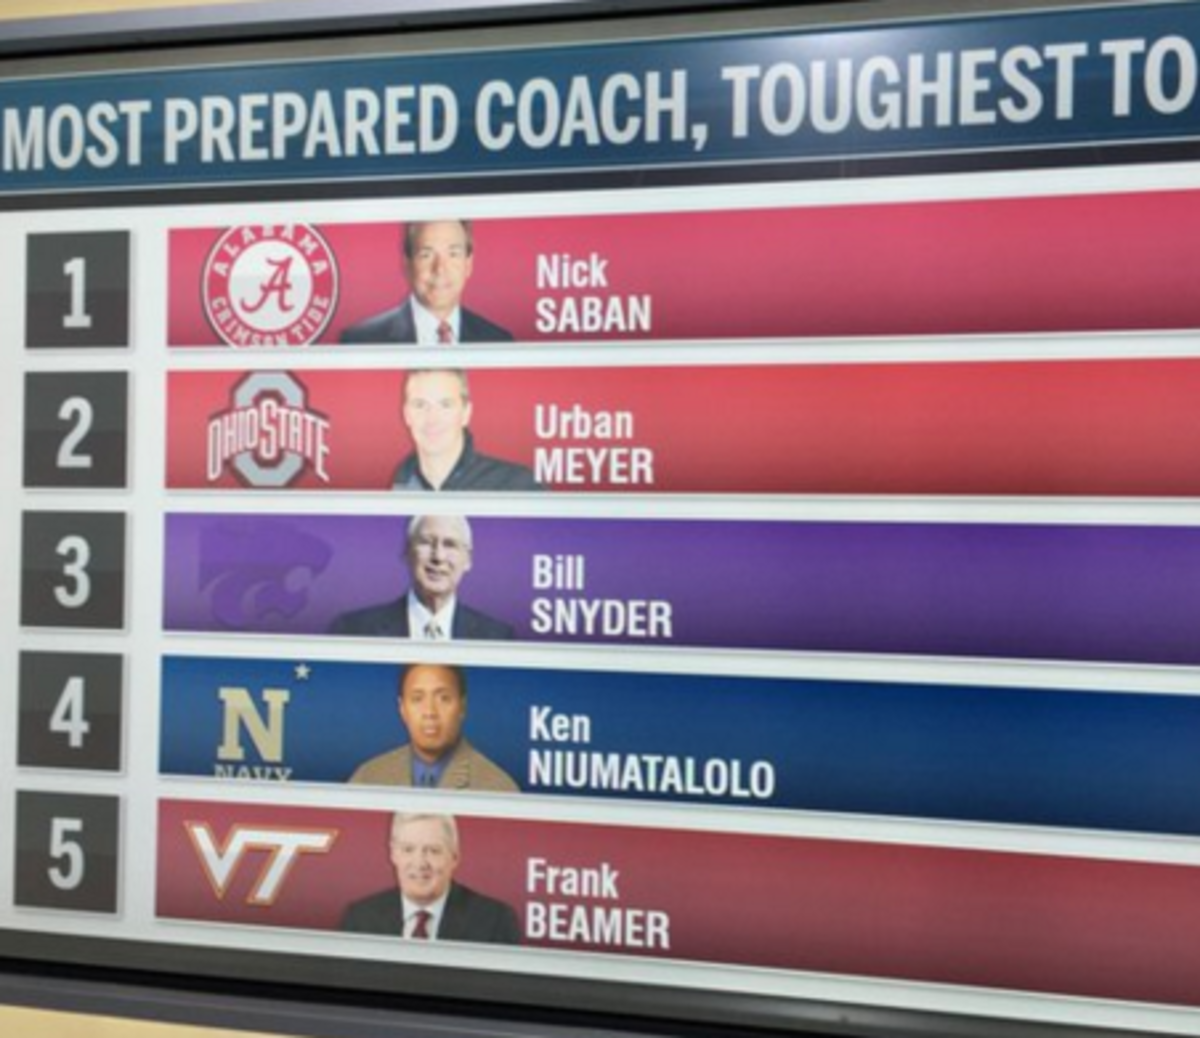 Nick Saban considered the most prepared opposing coach in college football.